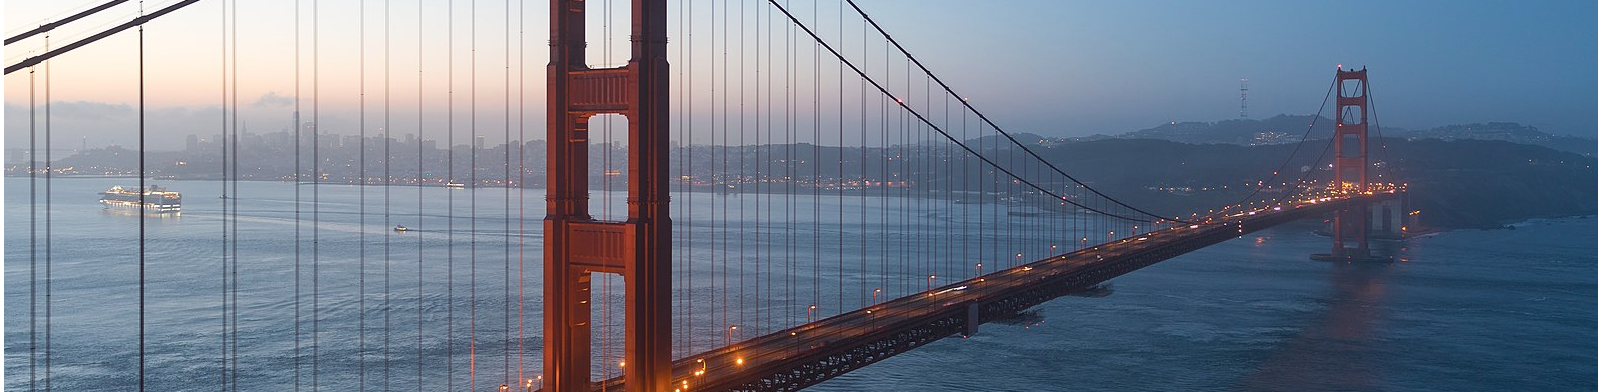 This guidebook will help you build a bridge to your future. Picture of the iconic Golden Gate Bridge in California during the blue hour adapted from an original by Frank Schulenburg (CC BY-SA) on Wikimedia Commons w.wiki/37kY